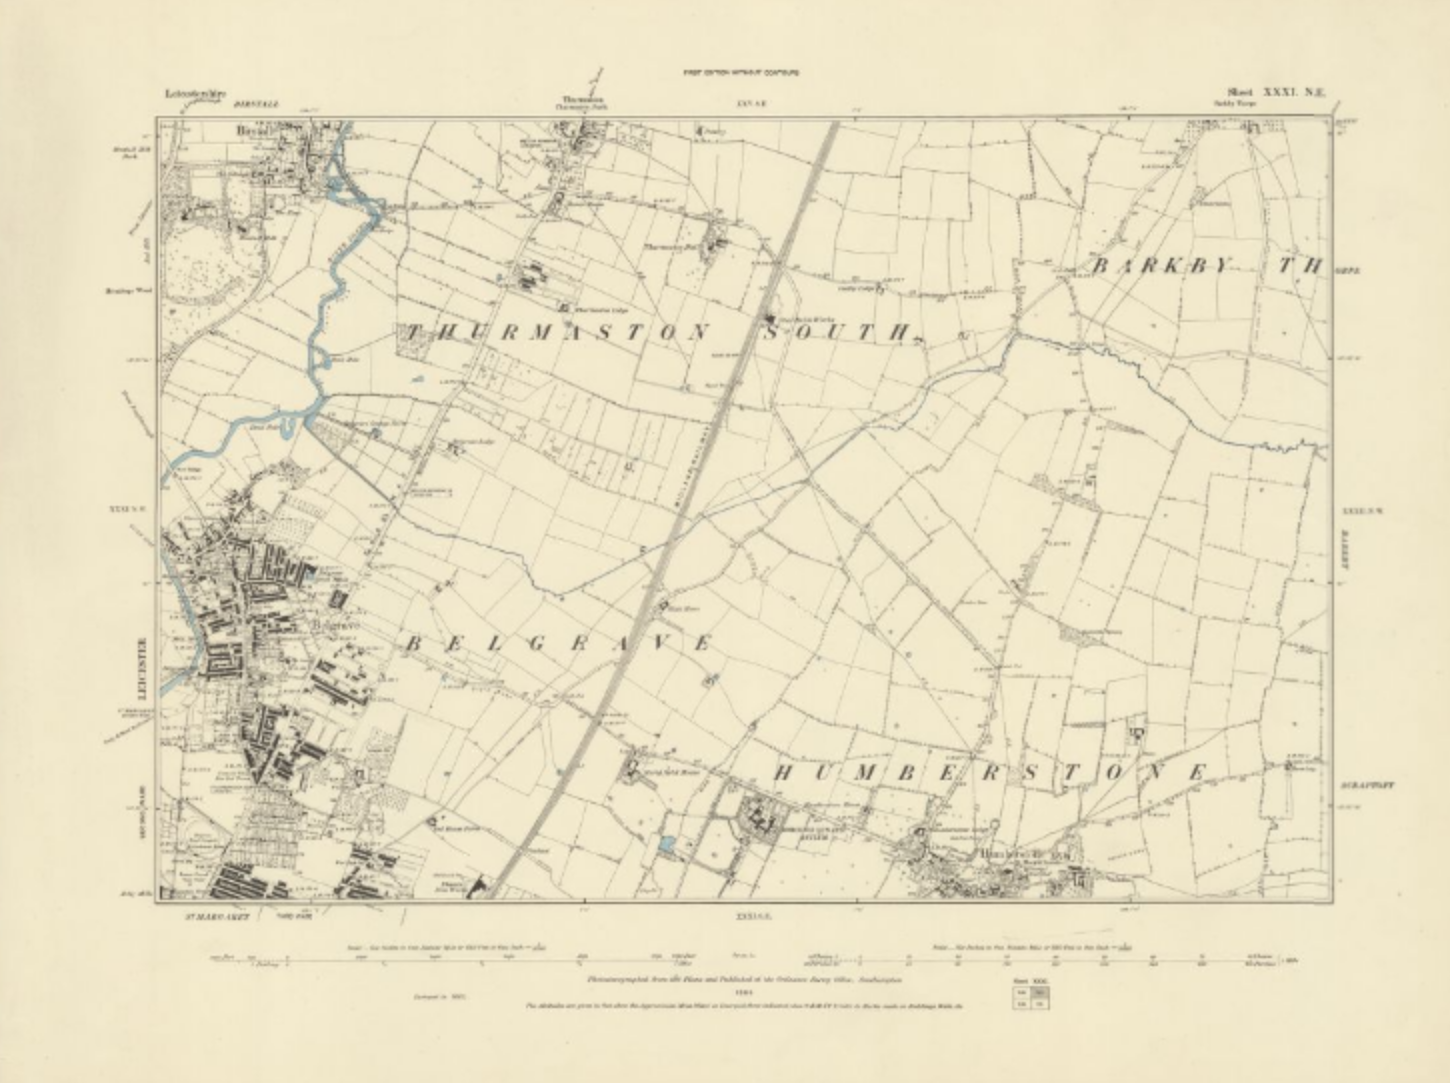 An ordnance map of North-East Leicester, leading to Thurmaston. Credit: Ordnance Survey / National Library of Scotland 